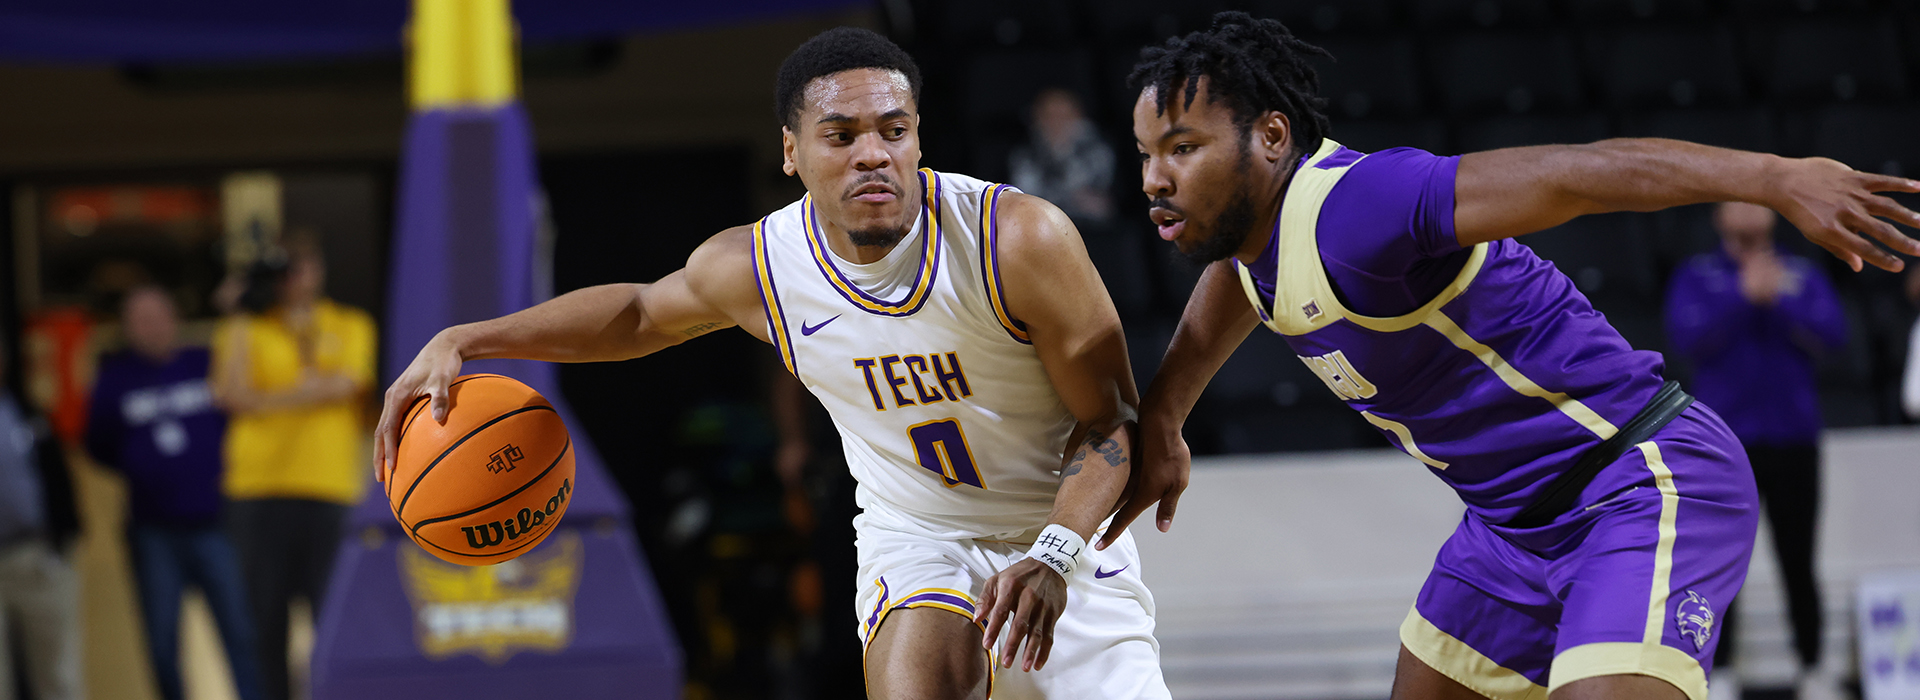 Tech closes out non-conference action with Tuesday tilt against Kentucky Christian